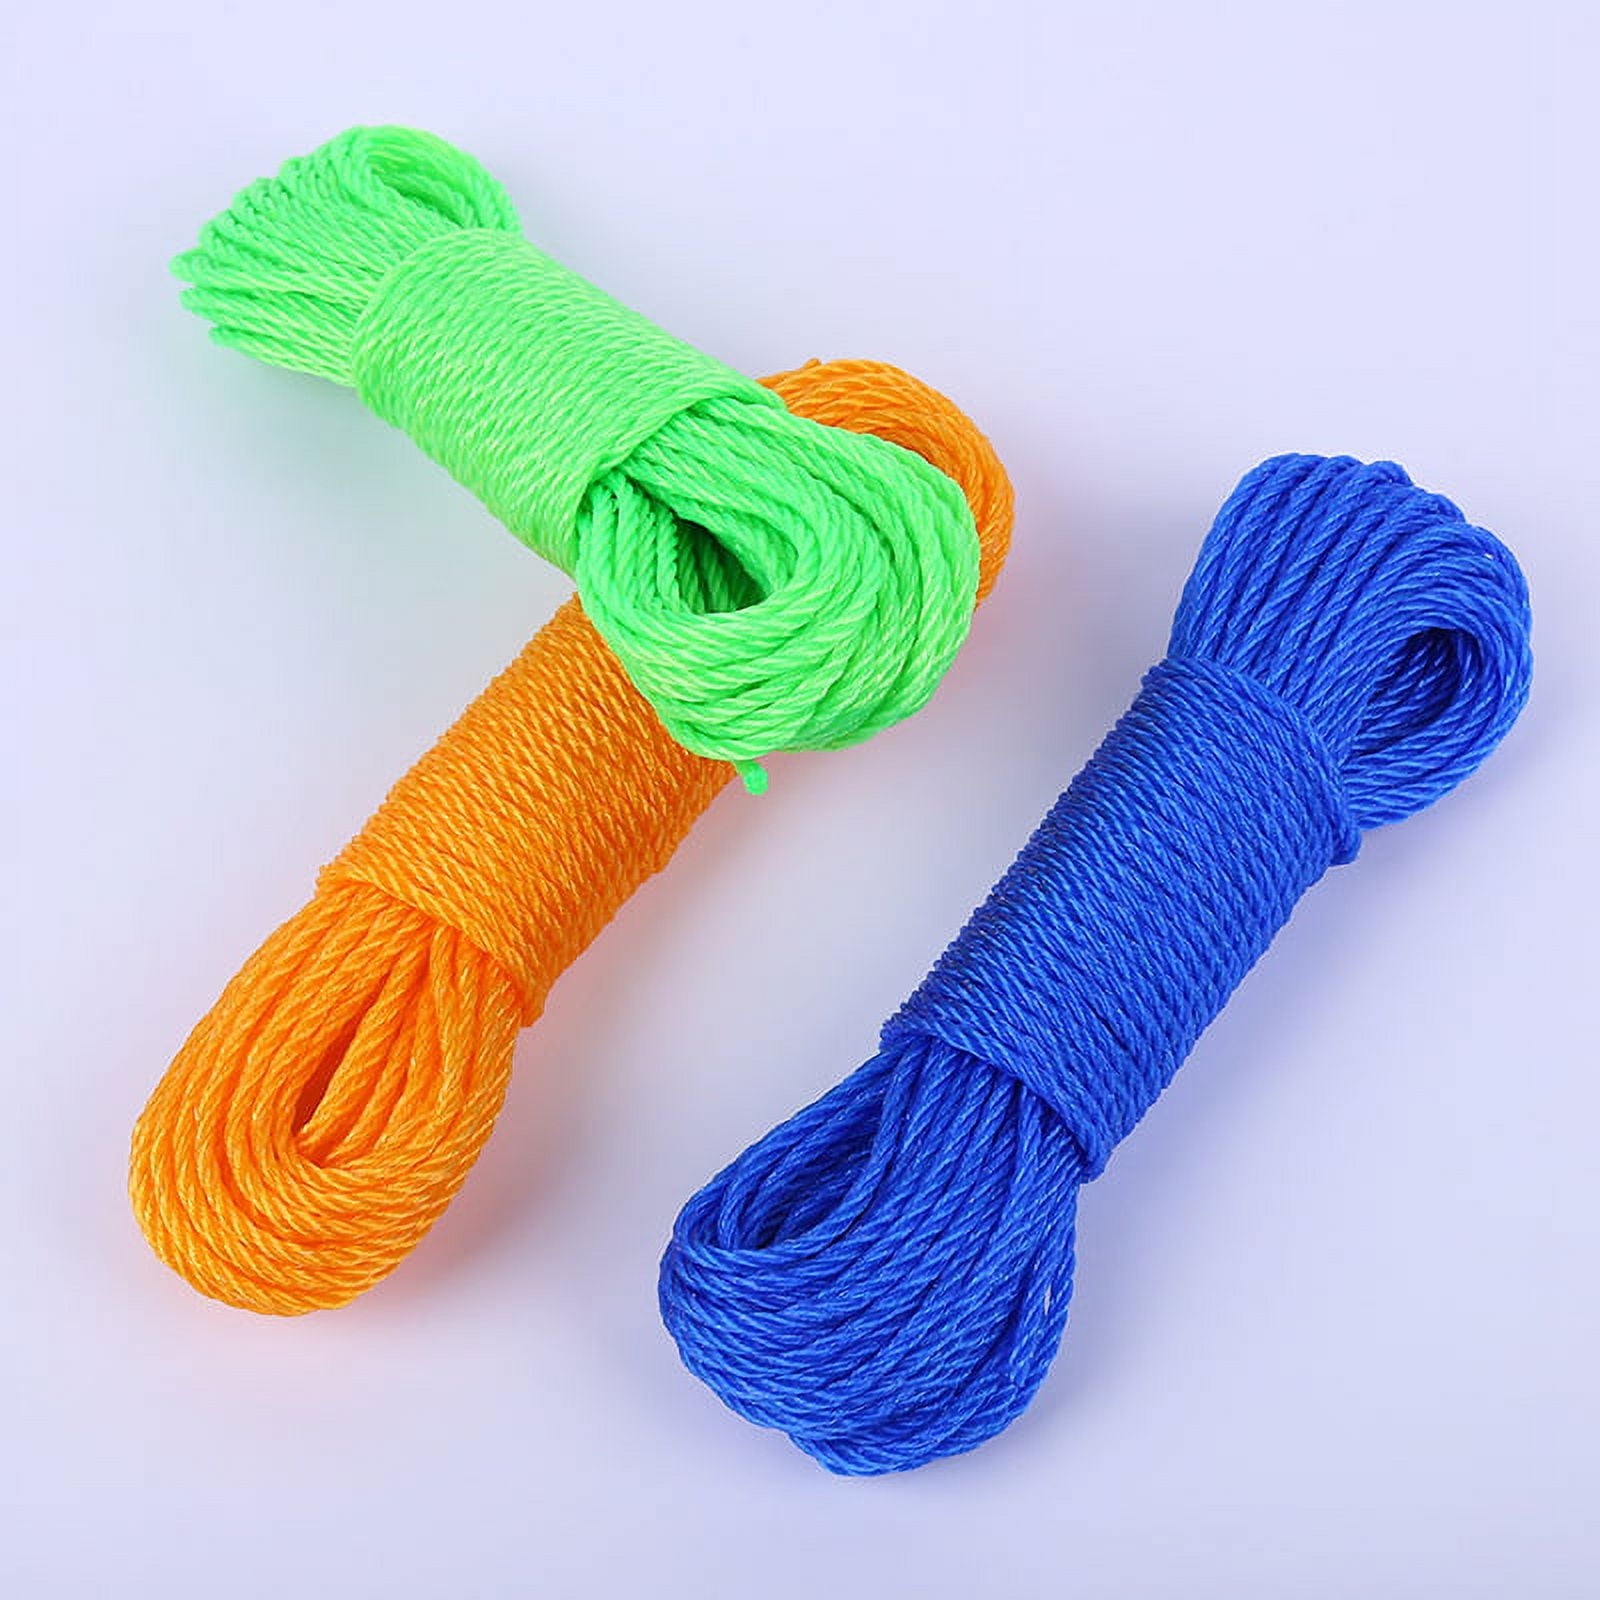 Buy One Get One! 5mm Premium Rope Small Bundles – Lots of Knots Canada